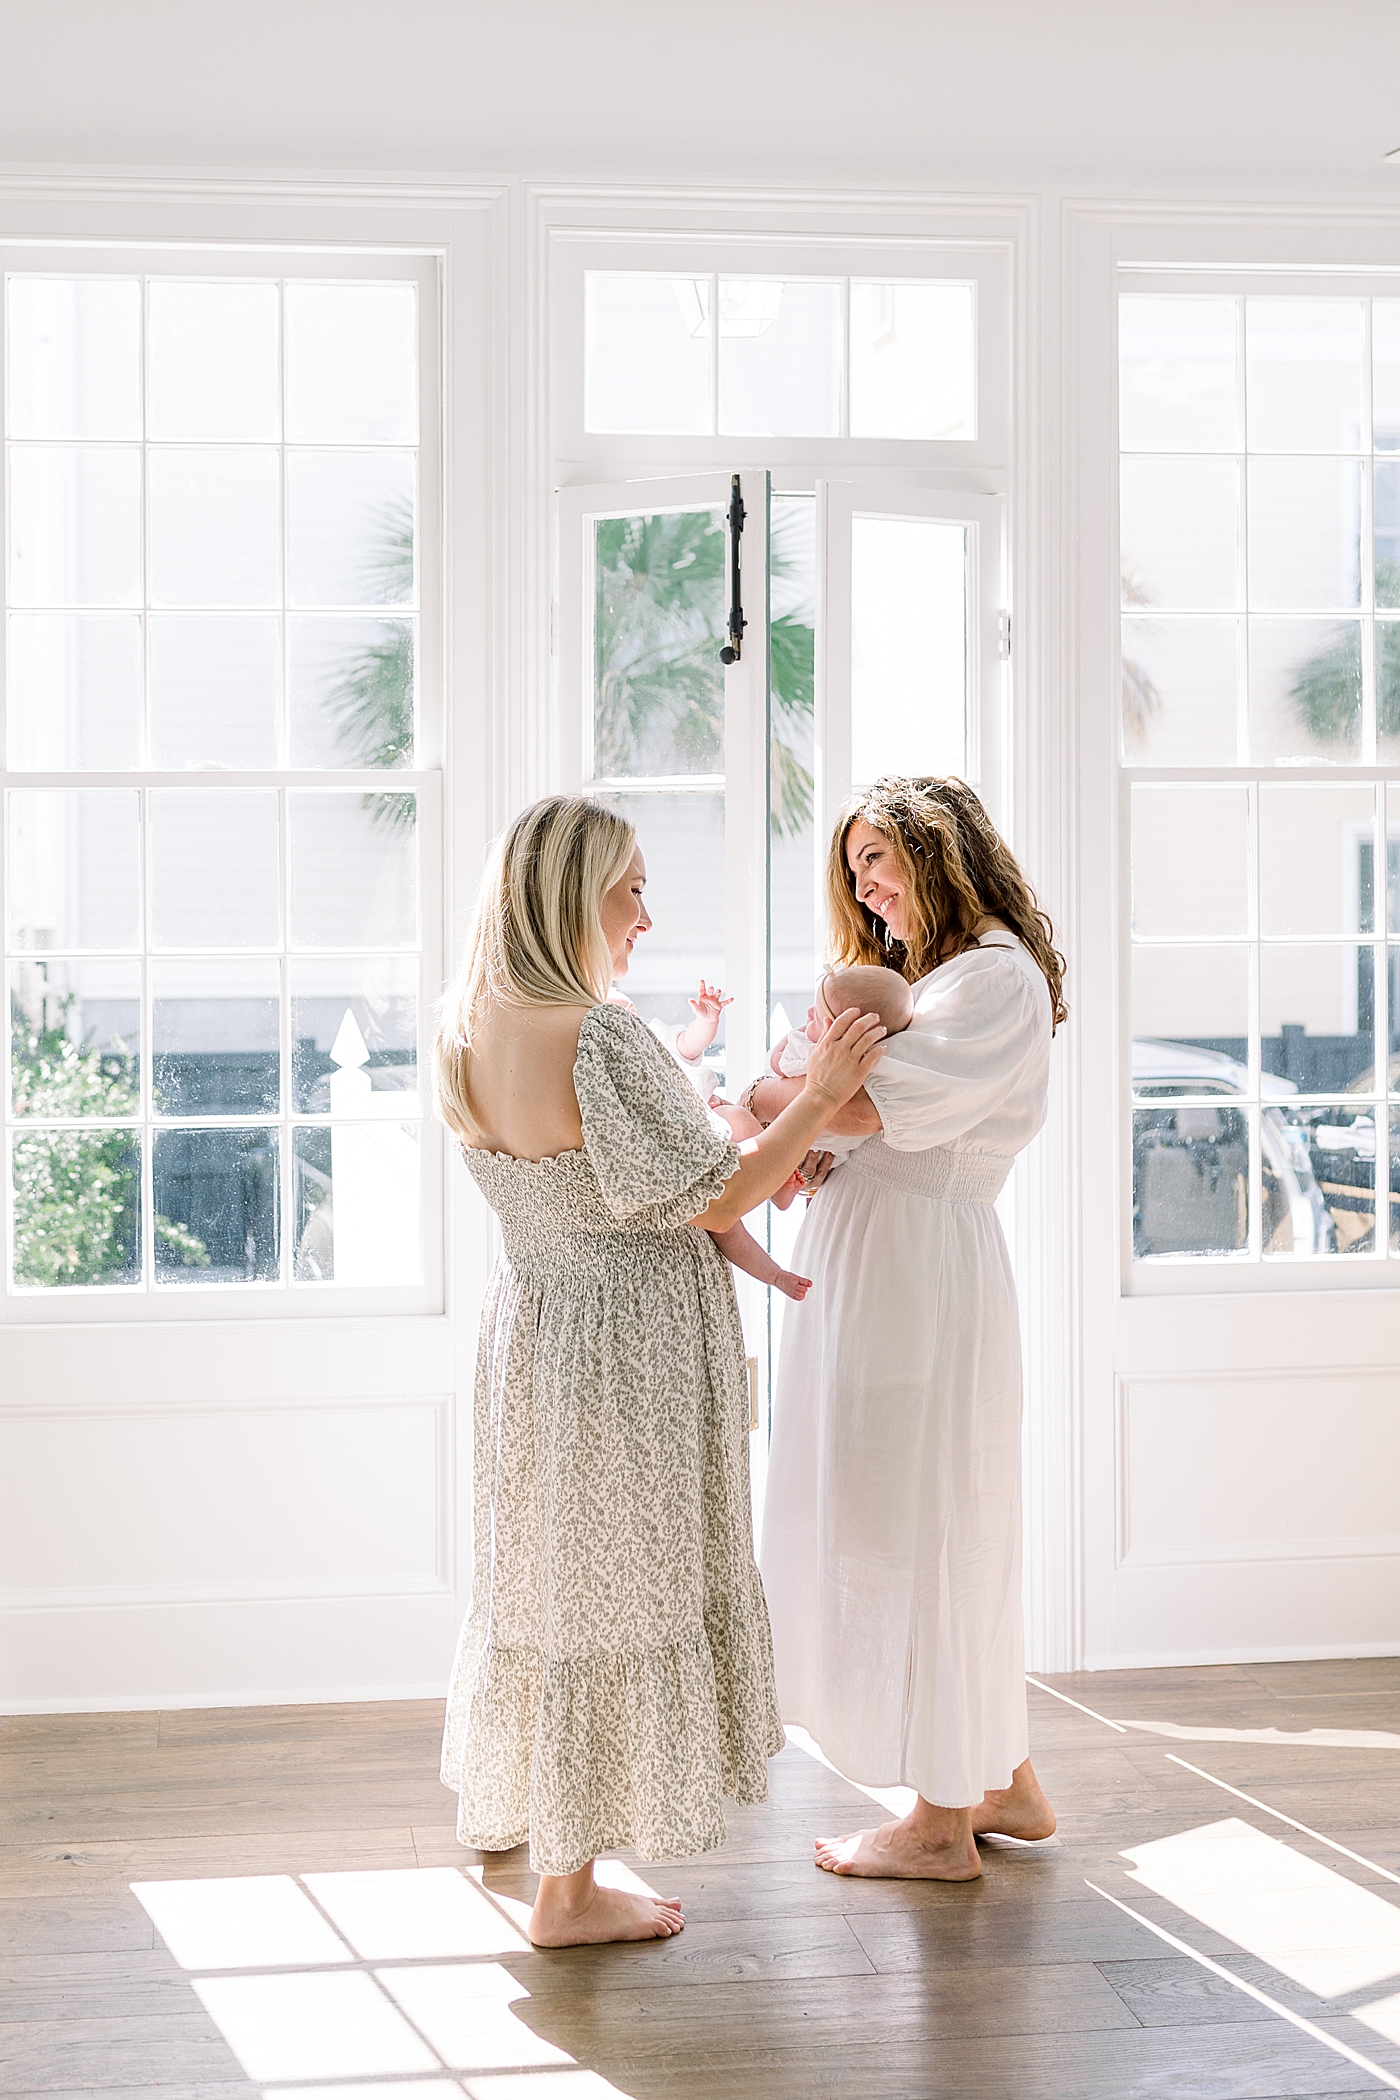 View from behind of a mother and grandmother in spring dresses holding twins | Image by Caitlyn Motycka 